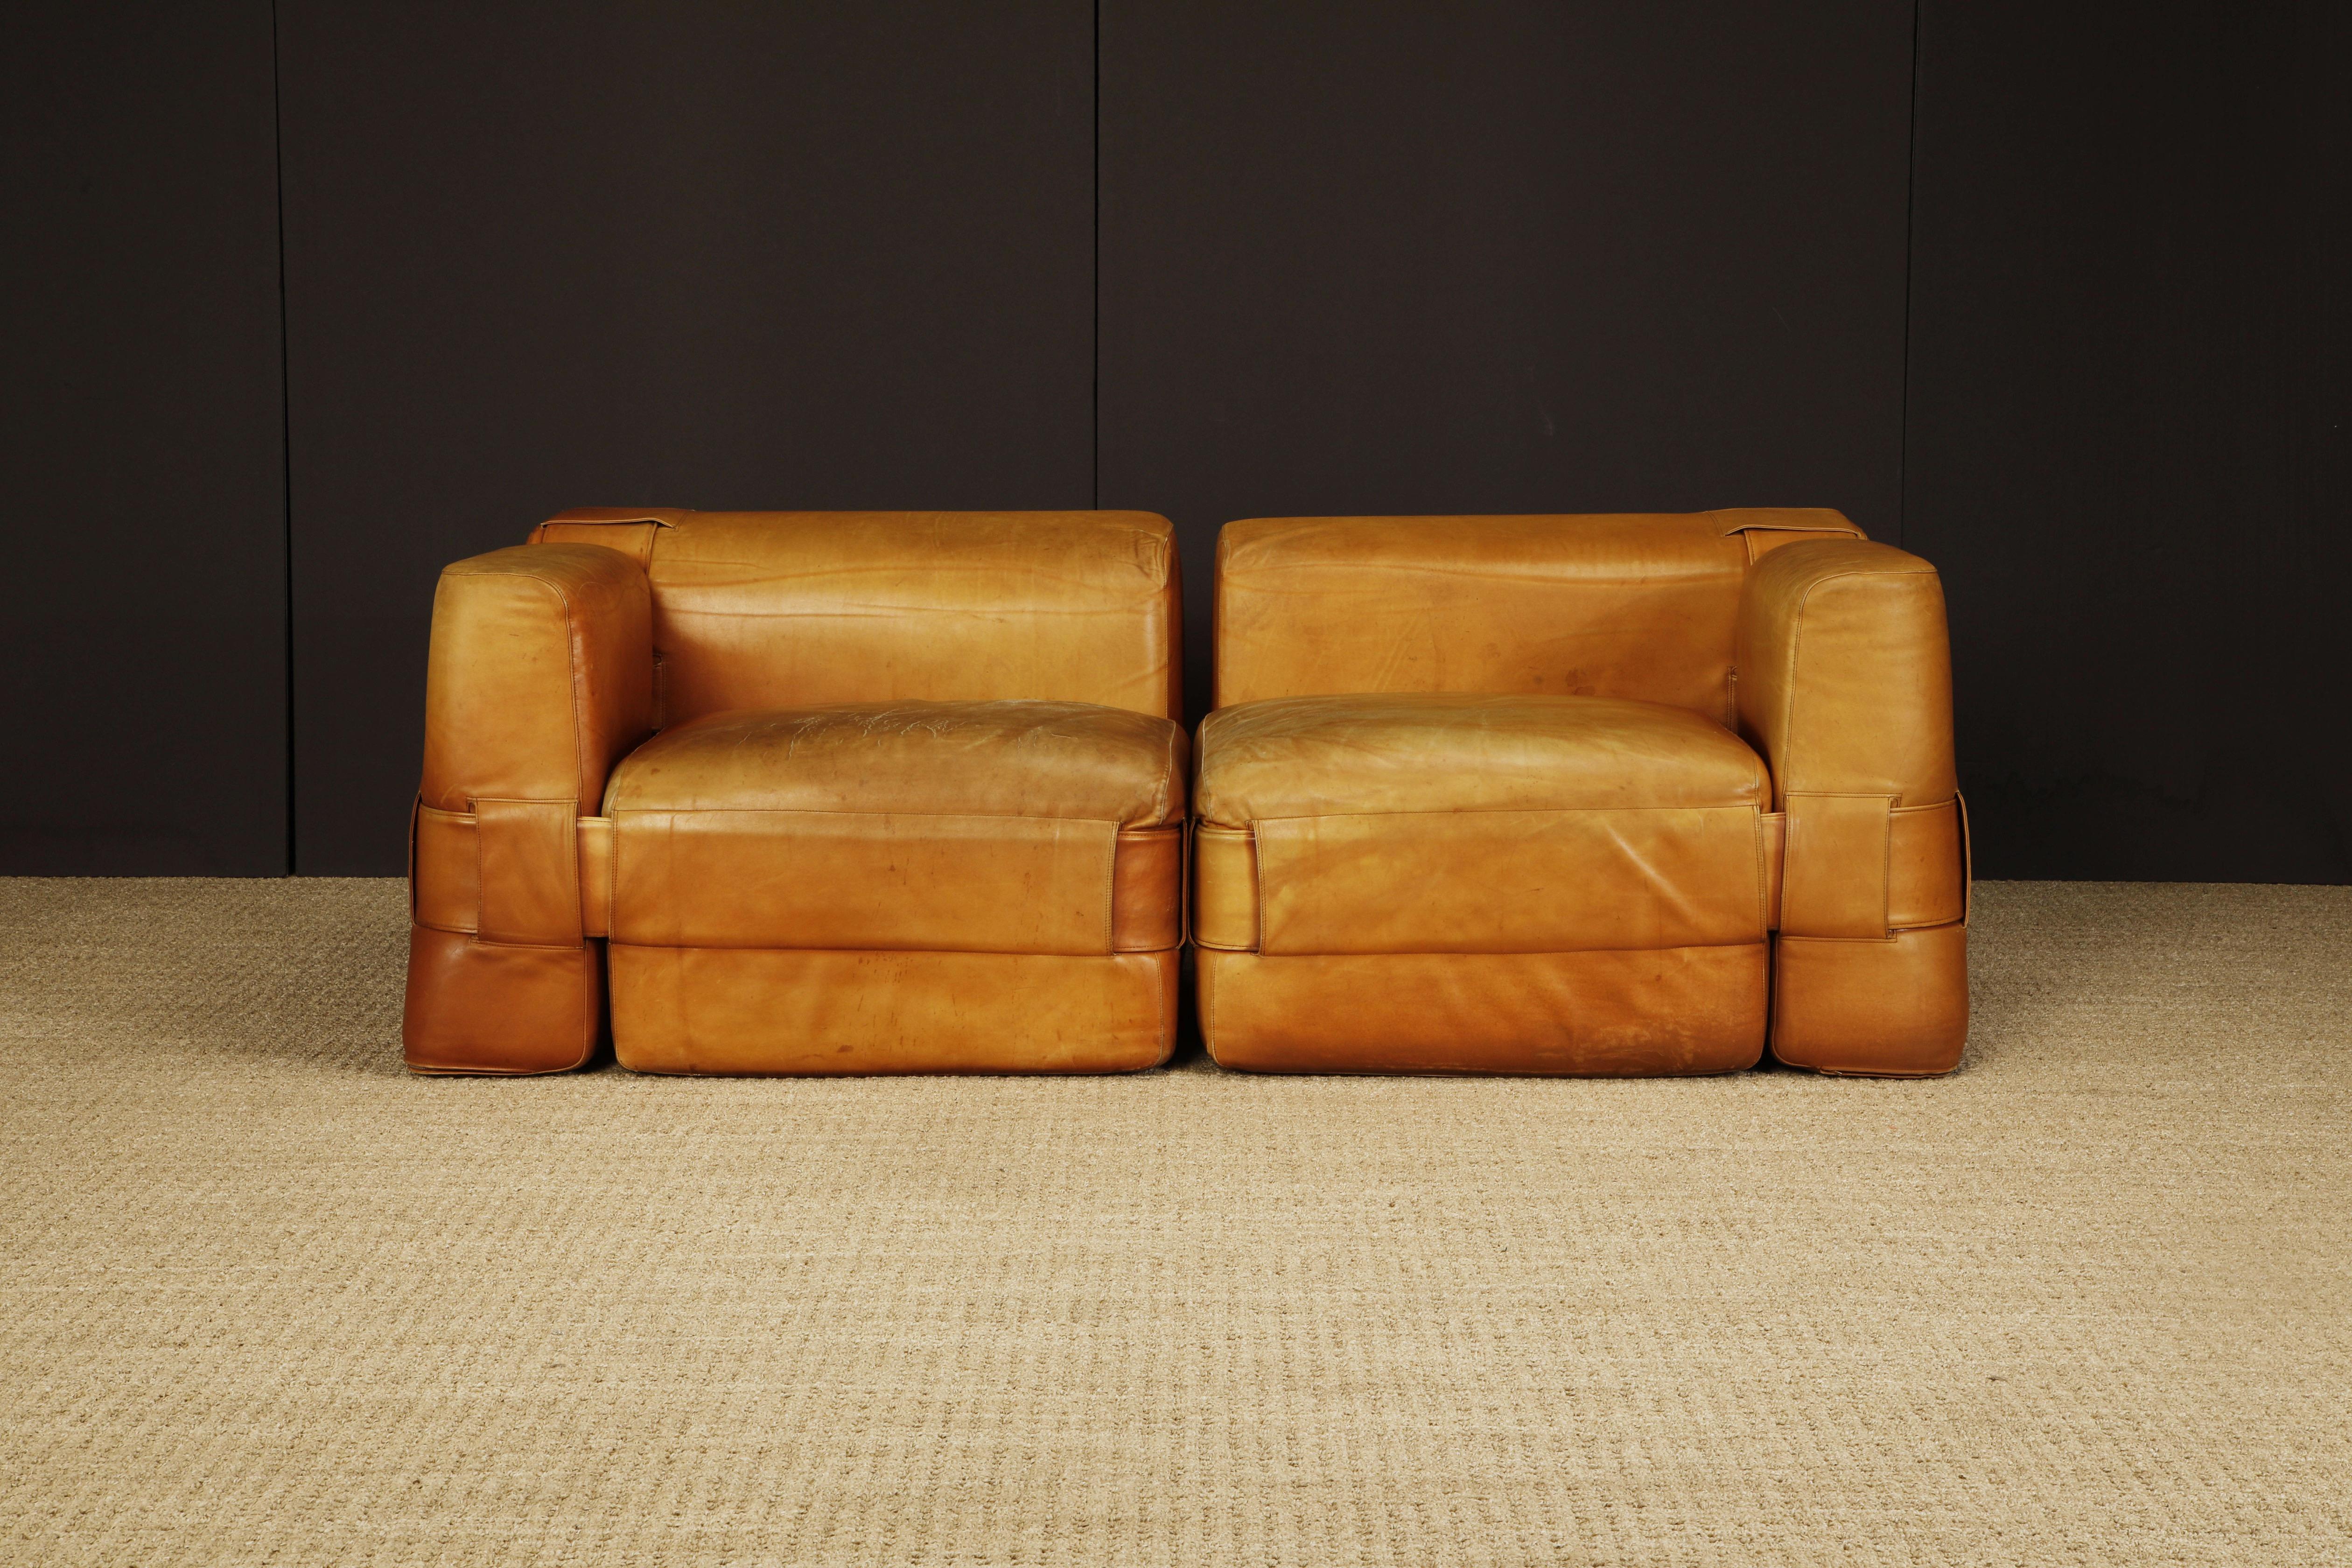 It doesn't get much cooler than this early year (original) collectors set of the model-932 'Quartet' sectional by Mario Bellini for Cassina. Released in 1964, this example has incredible thick leather hides in a gorgeous patinated cognac color.